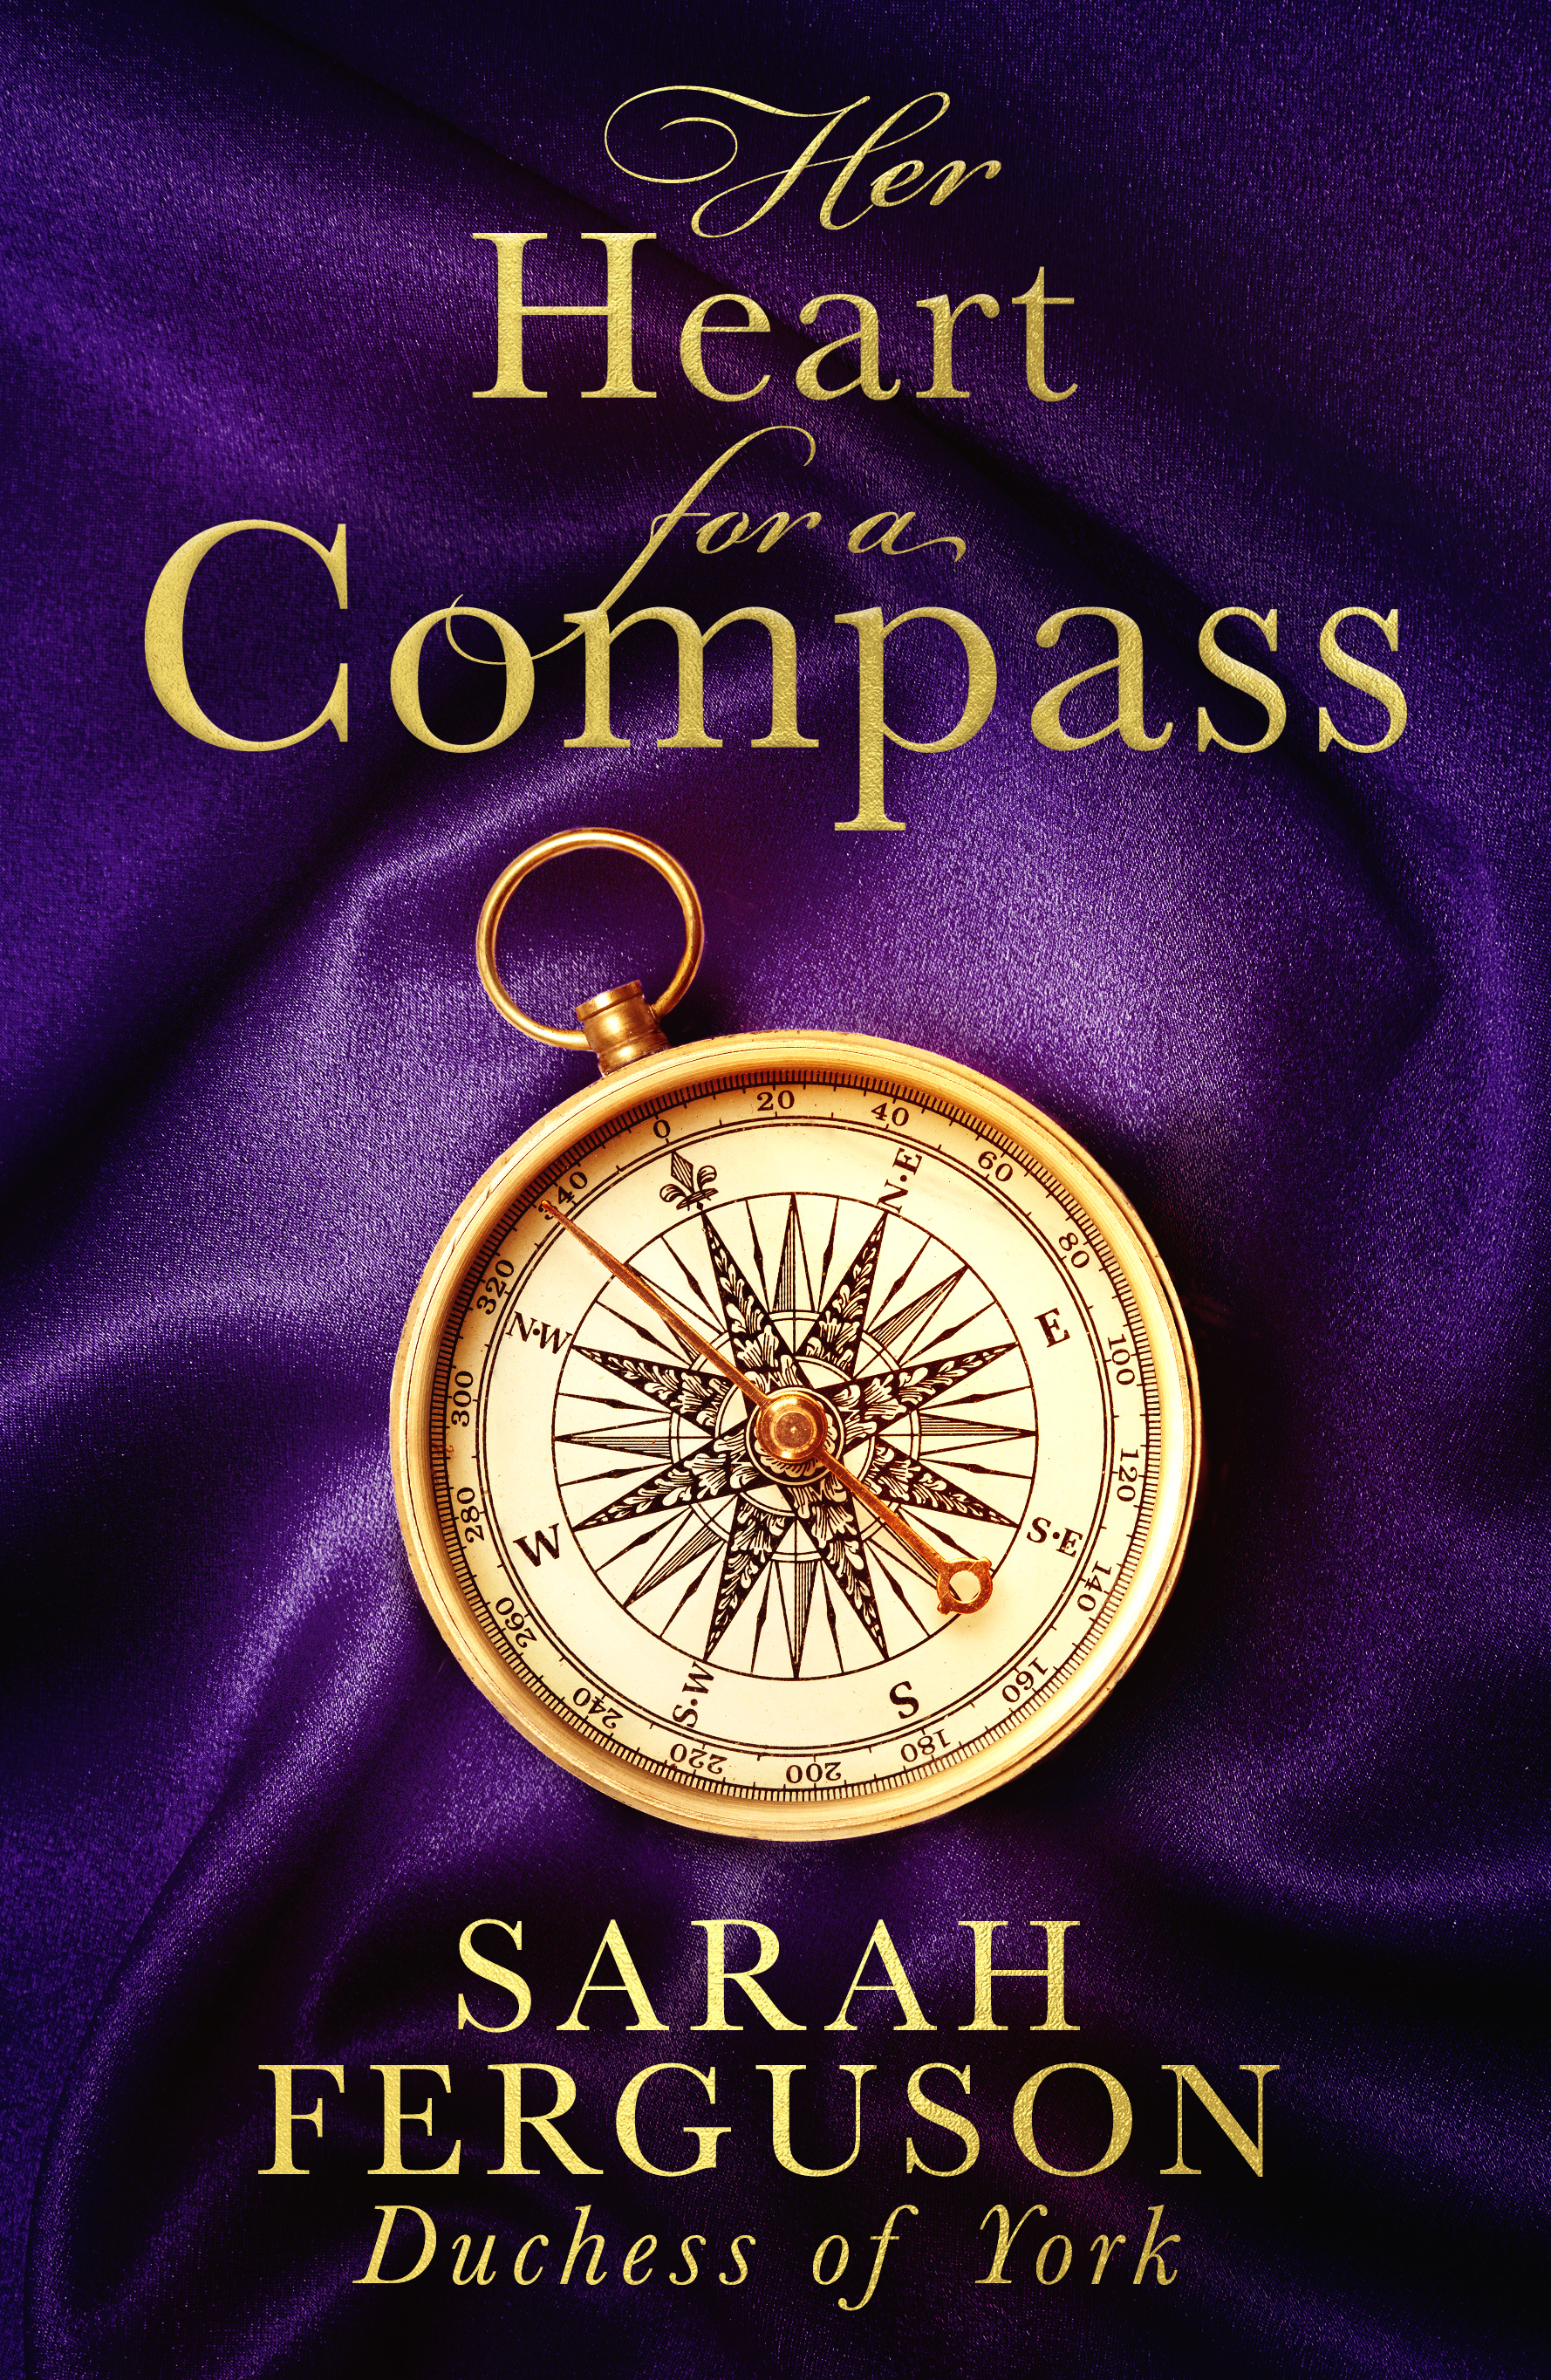 Her Heart for a Compass book cover image